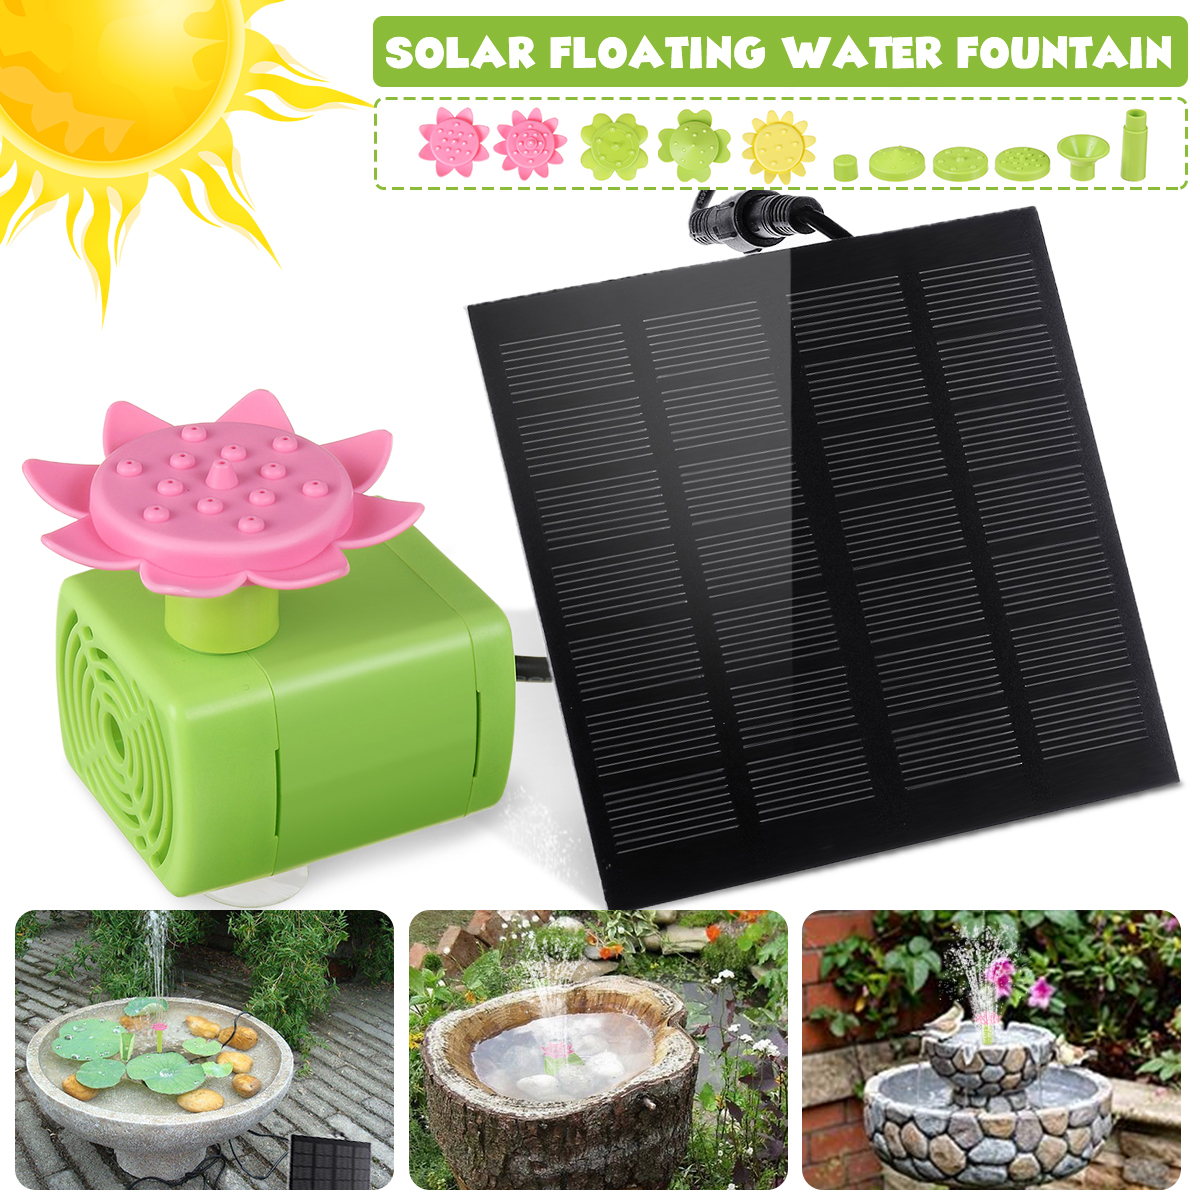 7V-14W-Solar-Powered-Water-Fountain-Pumps-Floating-Fountains-Pump-Waterproof-Home-Pond-Garden-Decor-1839781-1